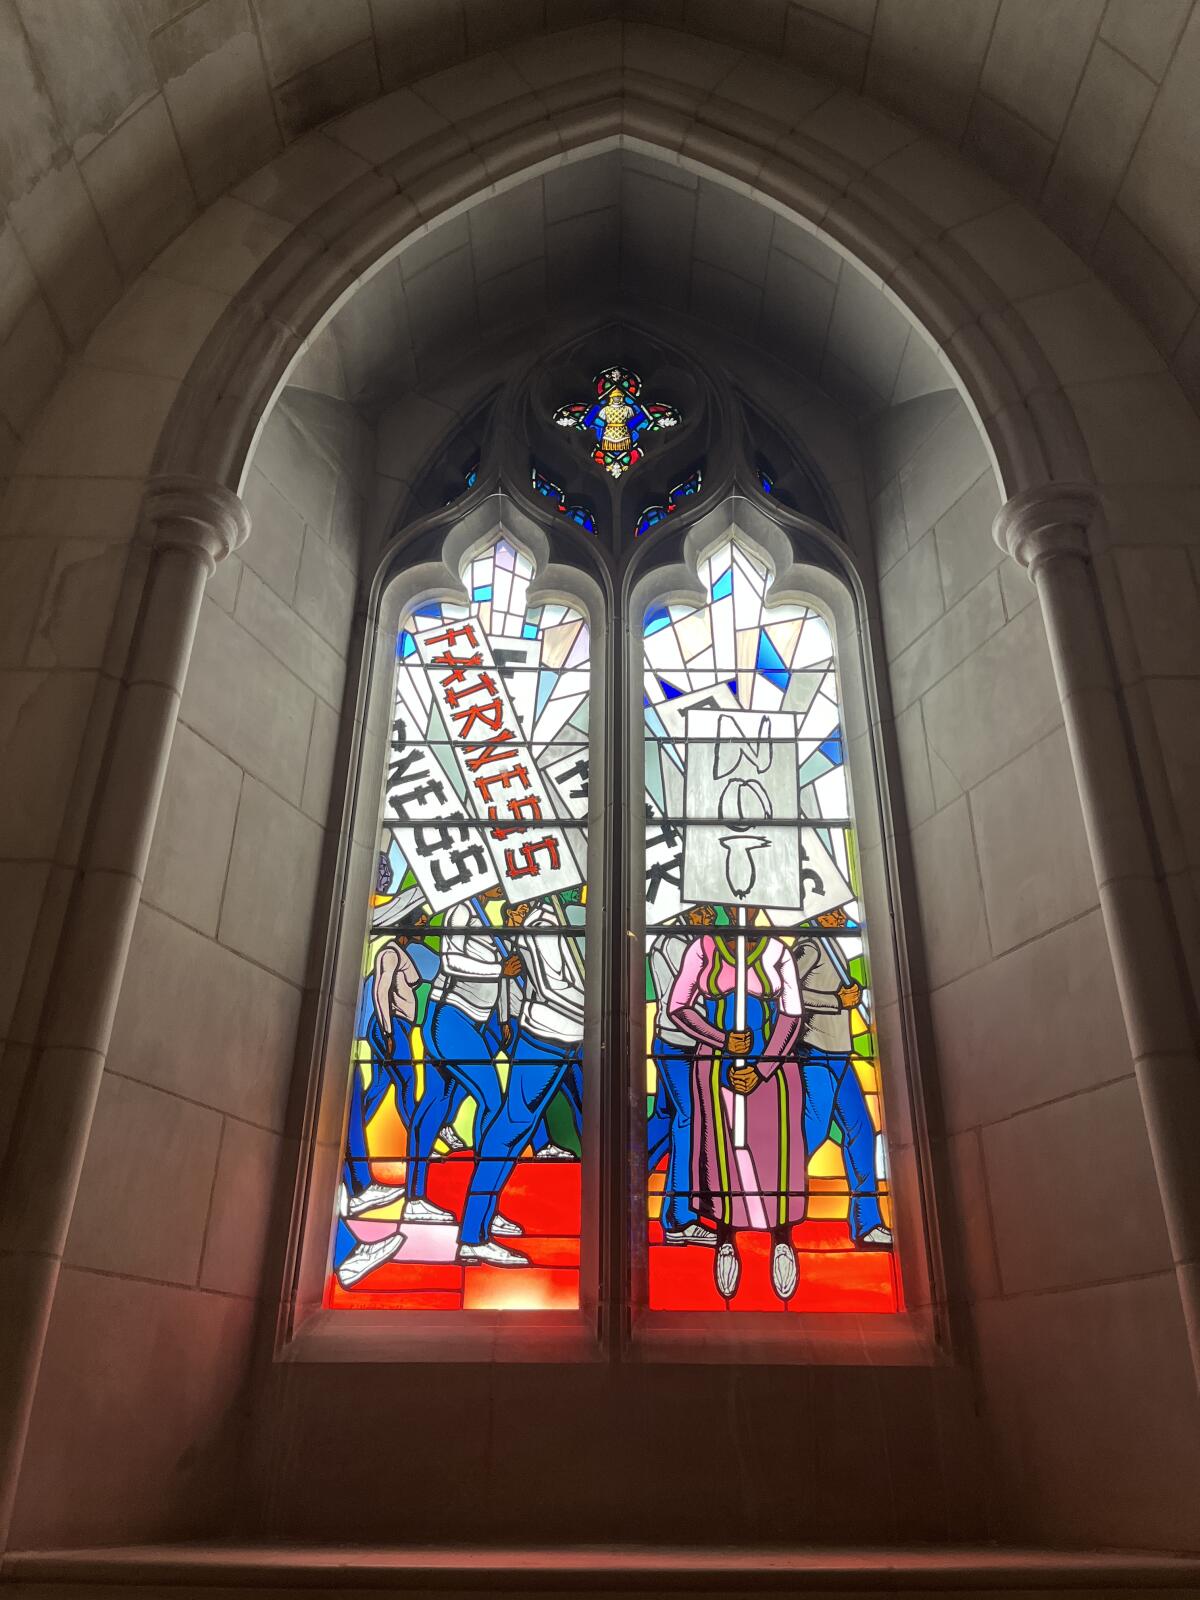 A view of two lancet-shaped stained glass windows show Black protestors bearing signs that read "FAIRNESS" and "NOT."